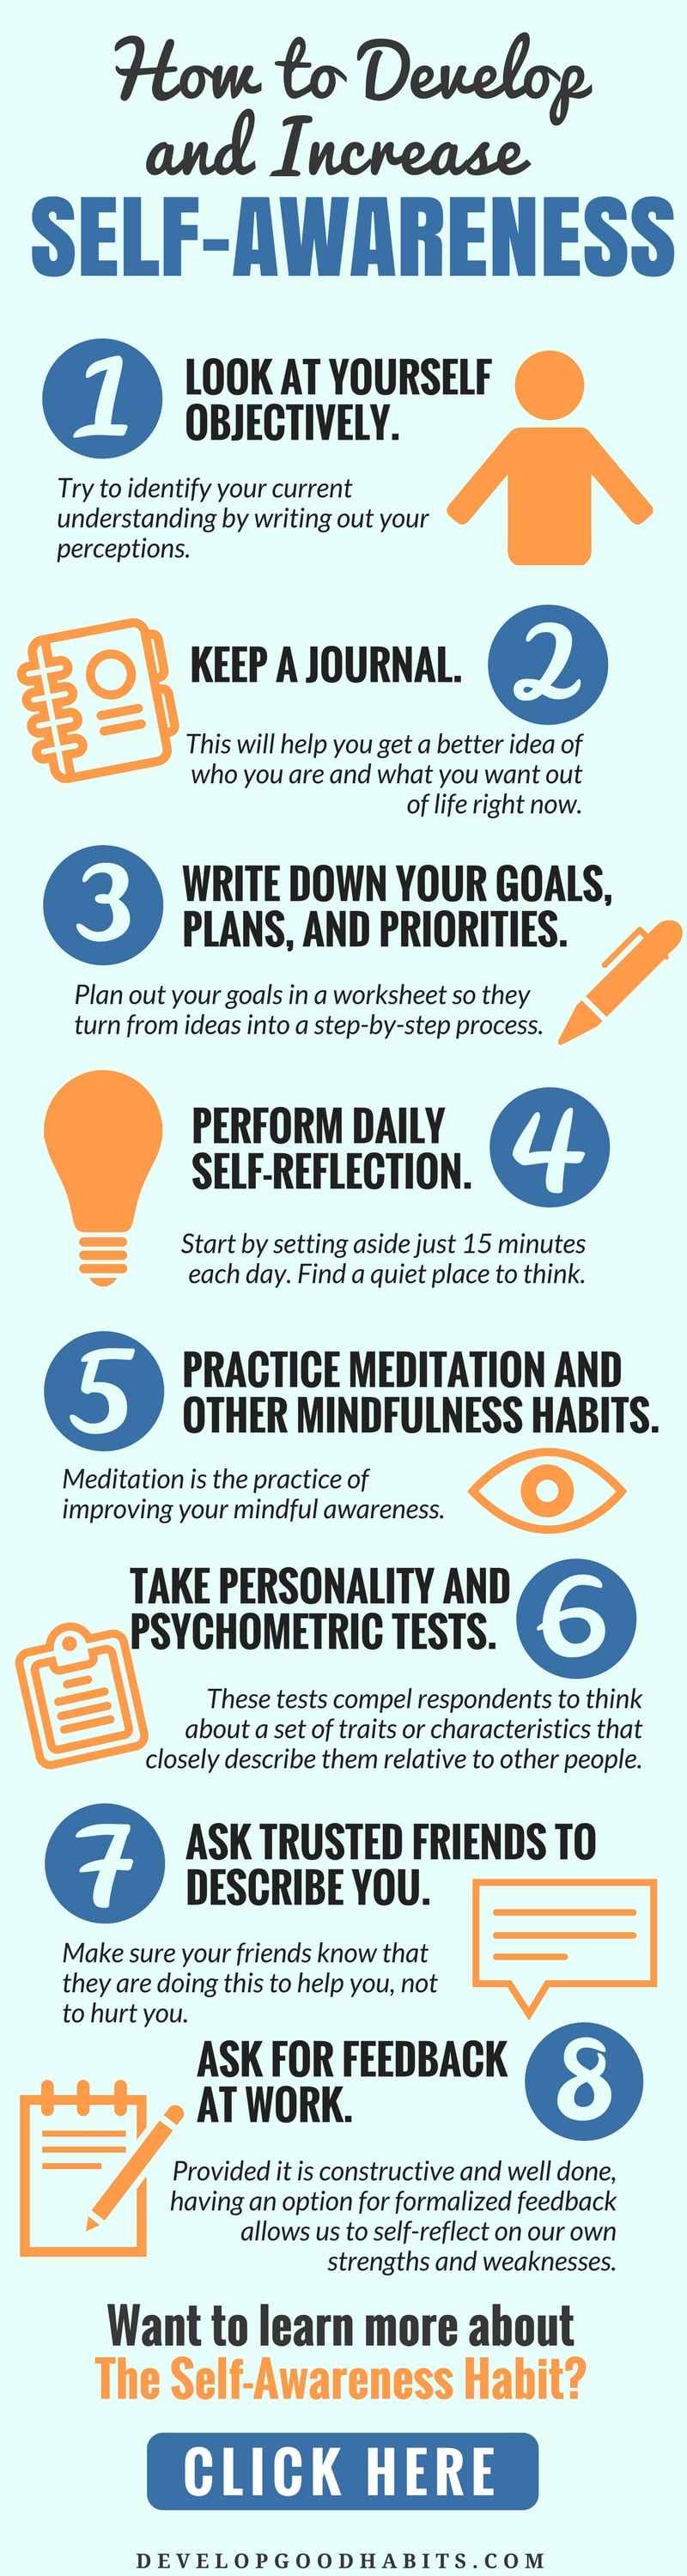 Learn What Is Self-Awareness and How to Develop It | Self Awareness infographic #awareness #psychology #mentalhealth #mindset #conciousness #spirituality #selfhelp #personaldevelopment #personalgrowth